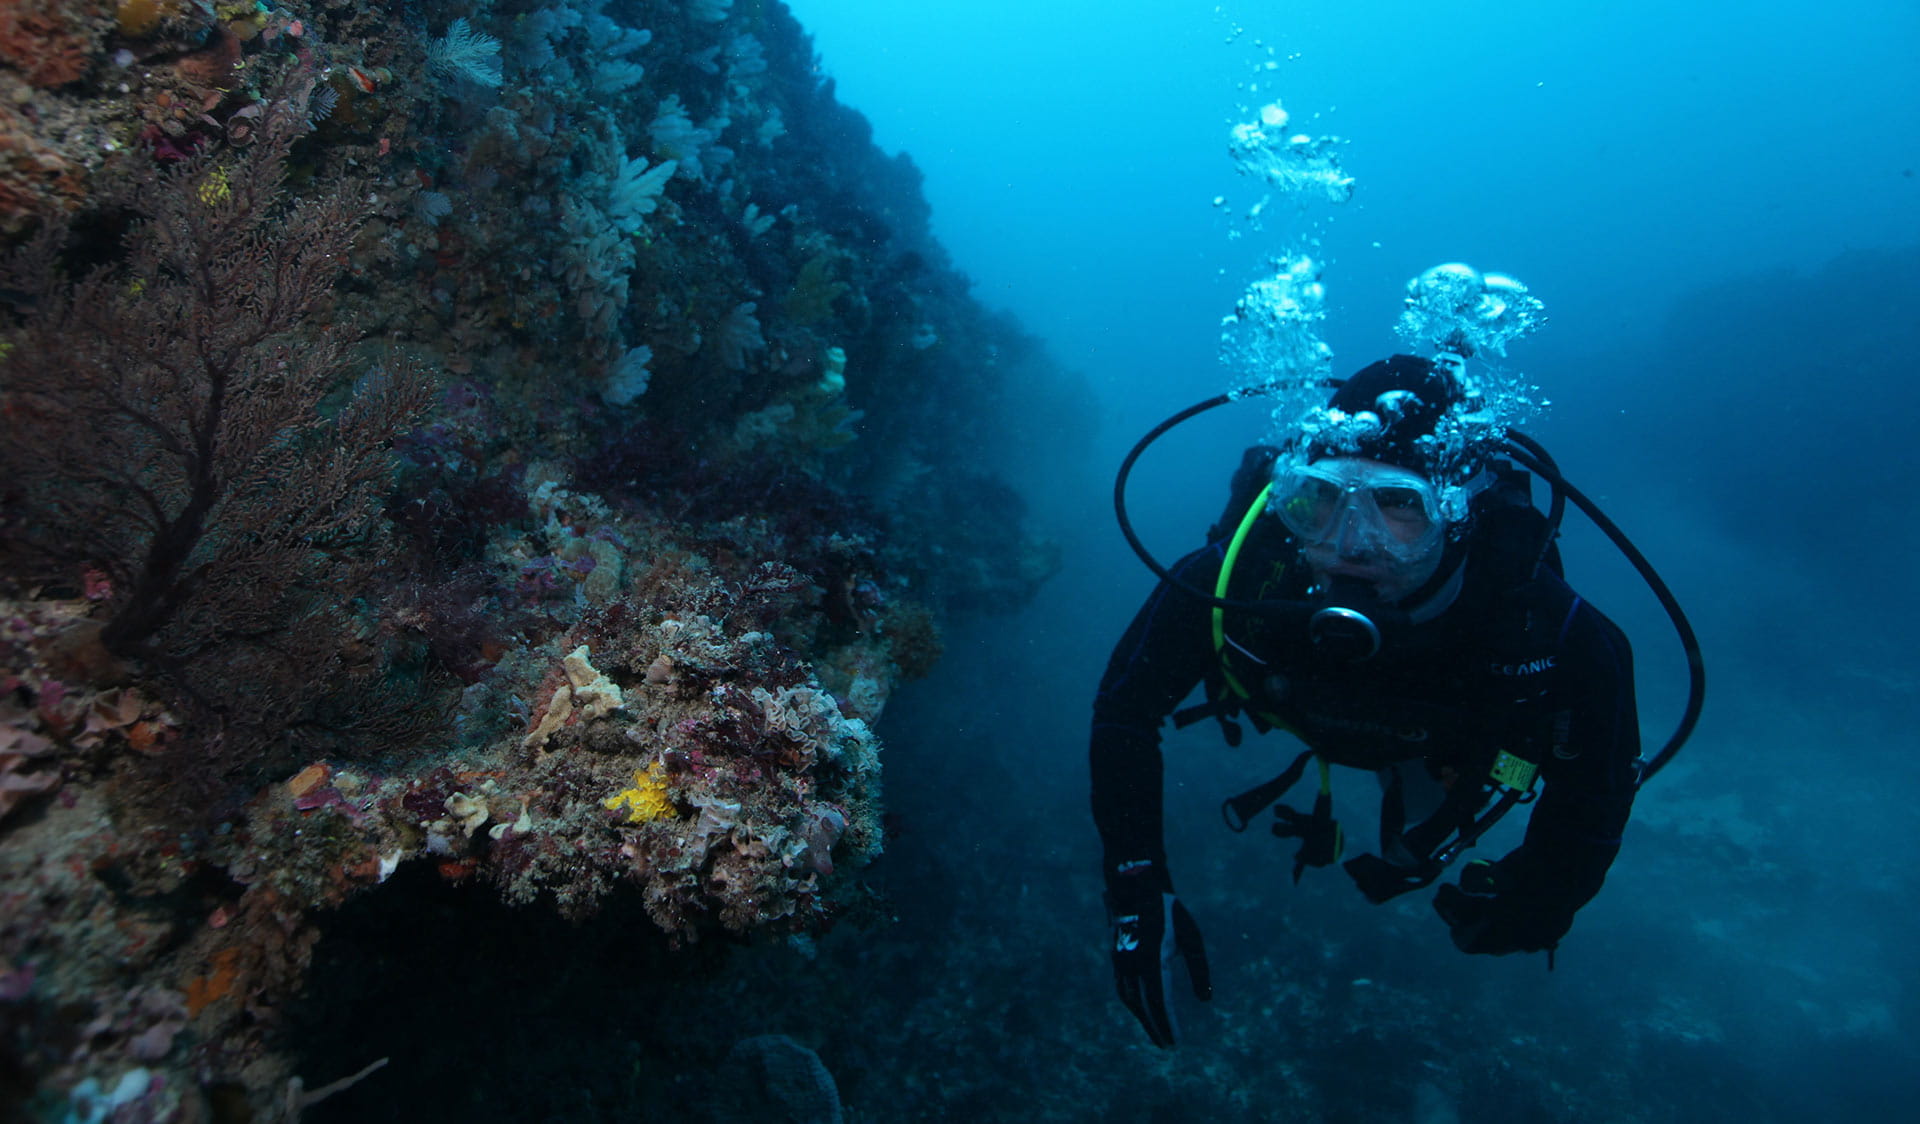 A diver explores a coral reef in the Twelve Apostles Marine National Park.